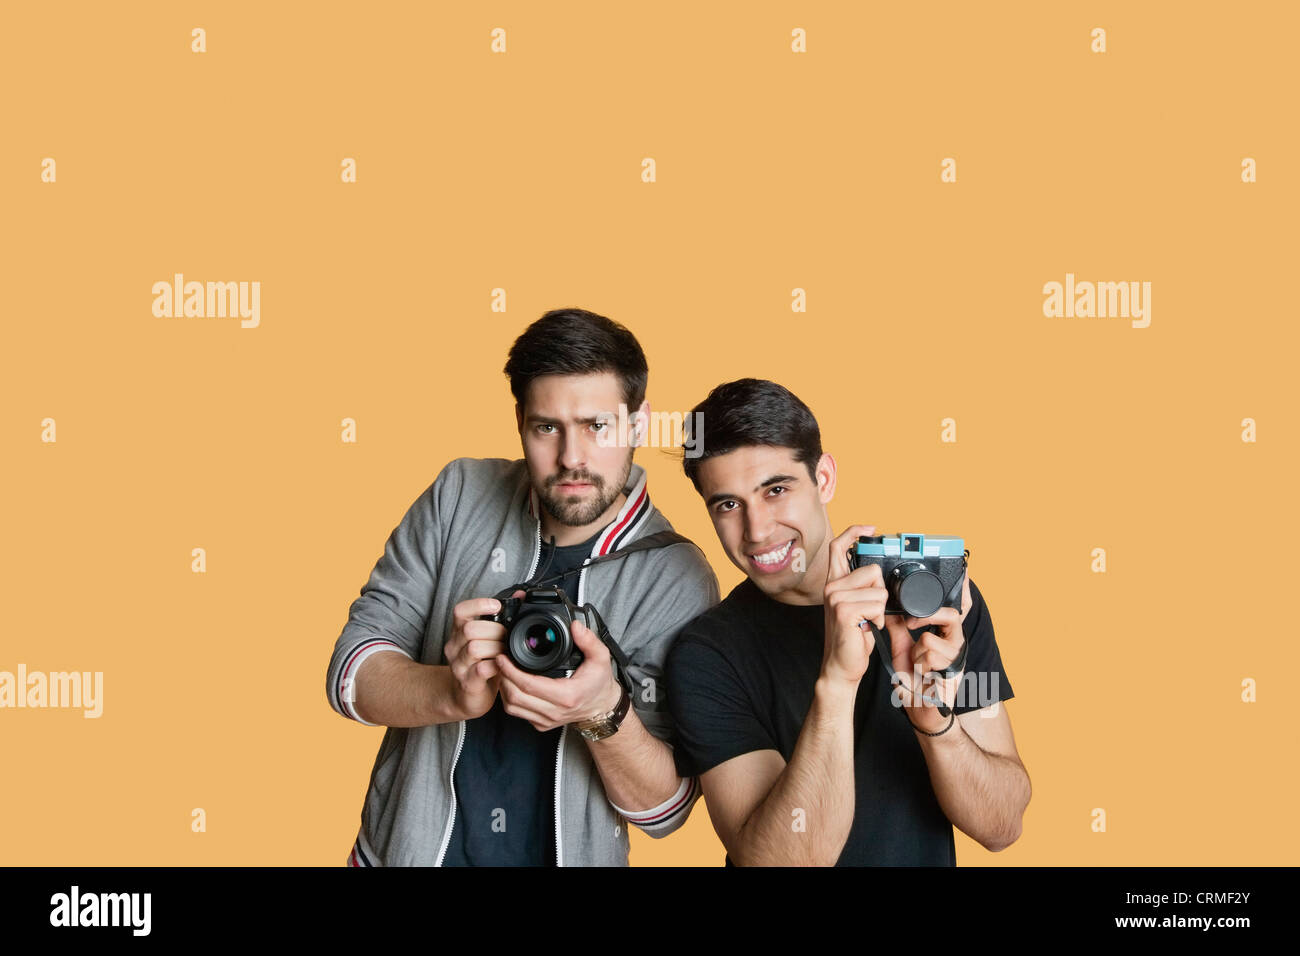 Portrait of young male friends with digital camera over colored background Stock Photo